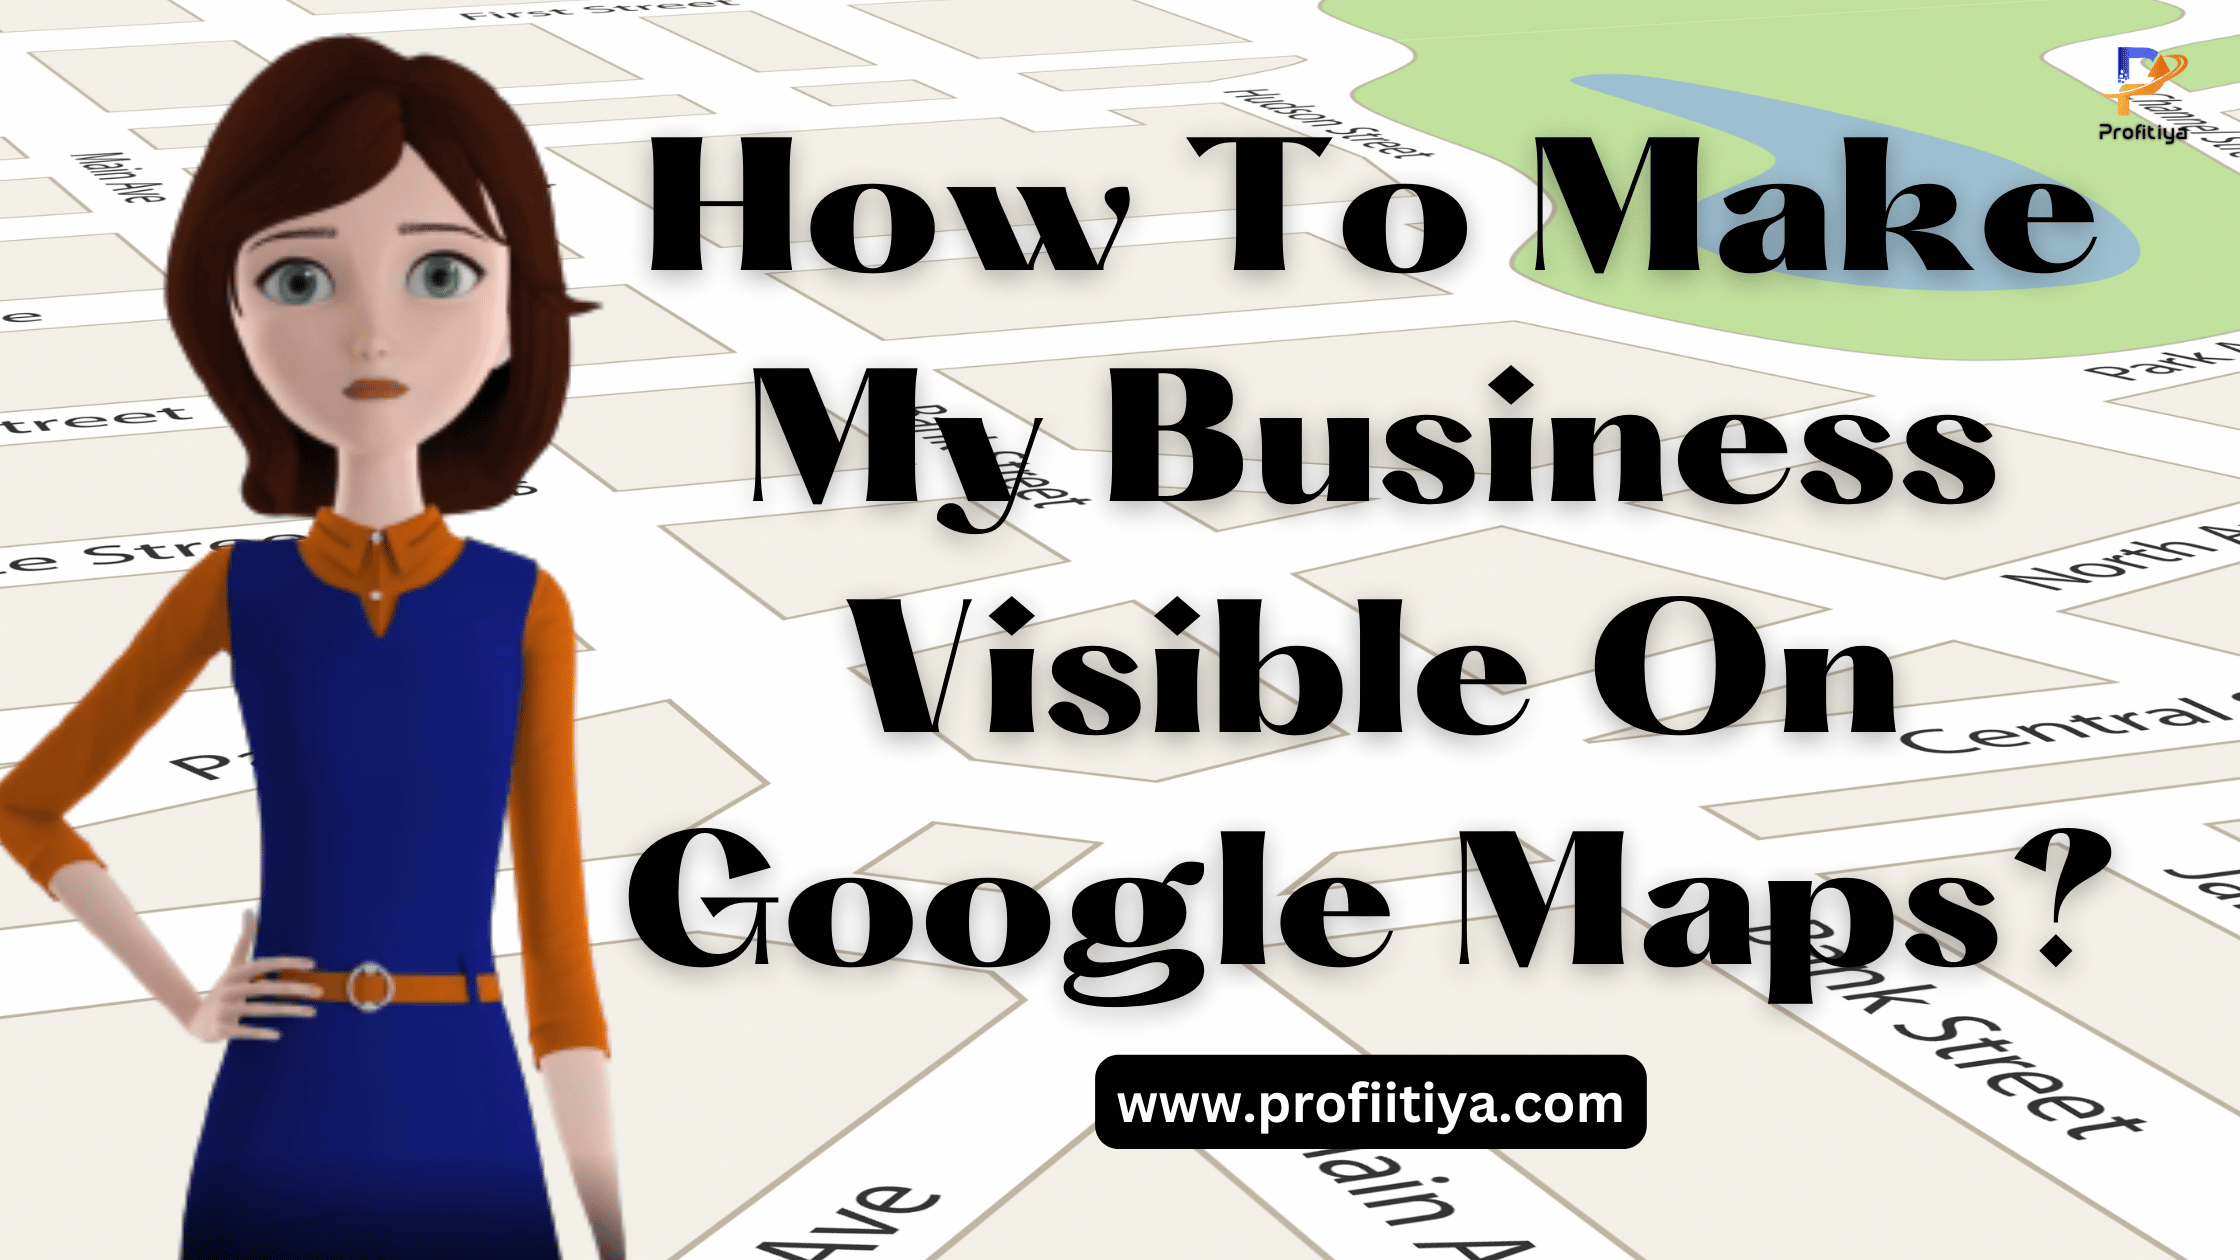 How To Make My Business Visible On Google Maps?